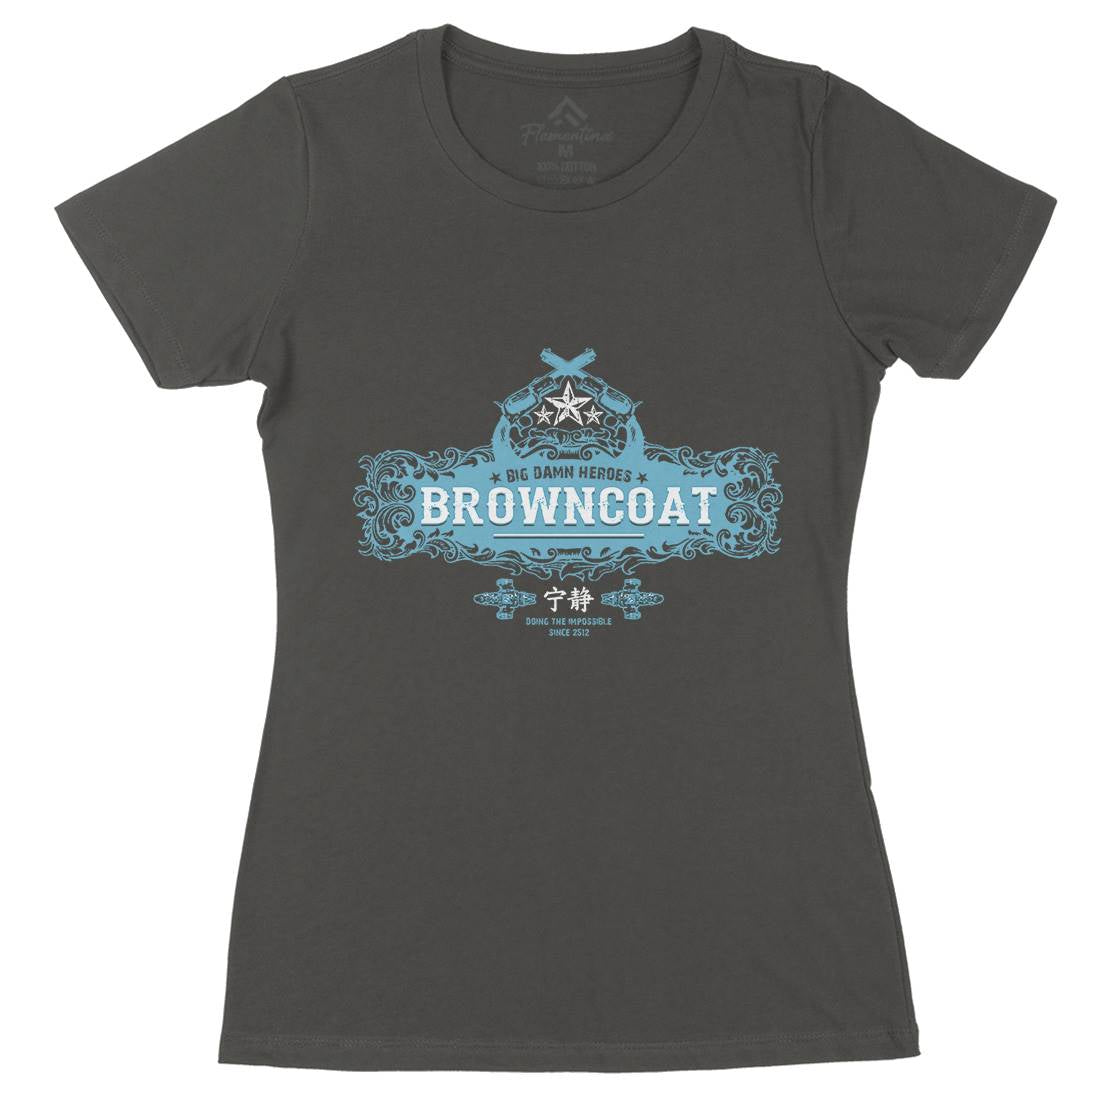 Browncoat Womens Organic Crew Neck T-Shirt Space D350